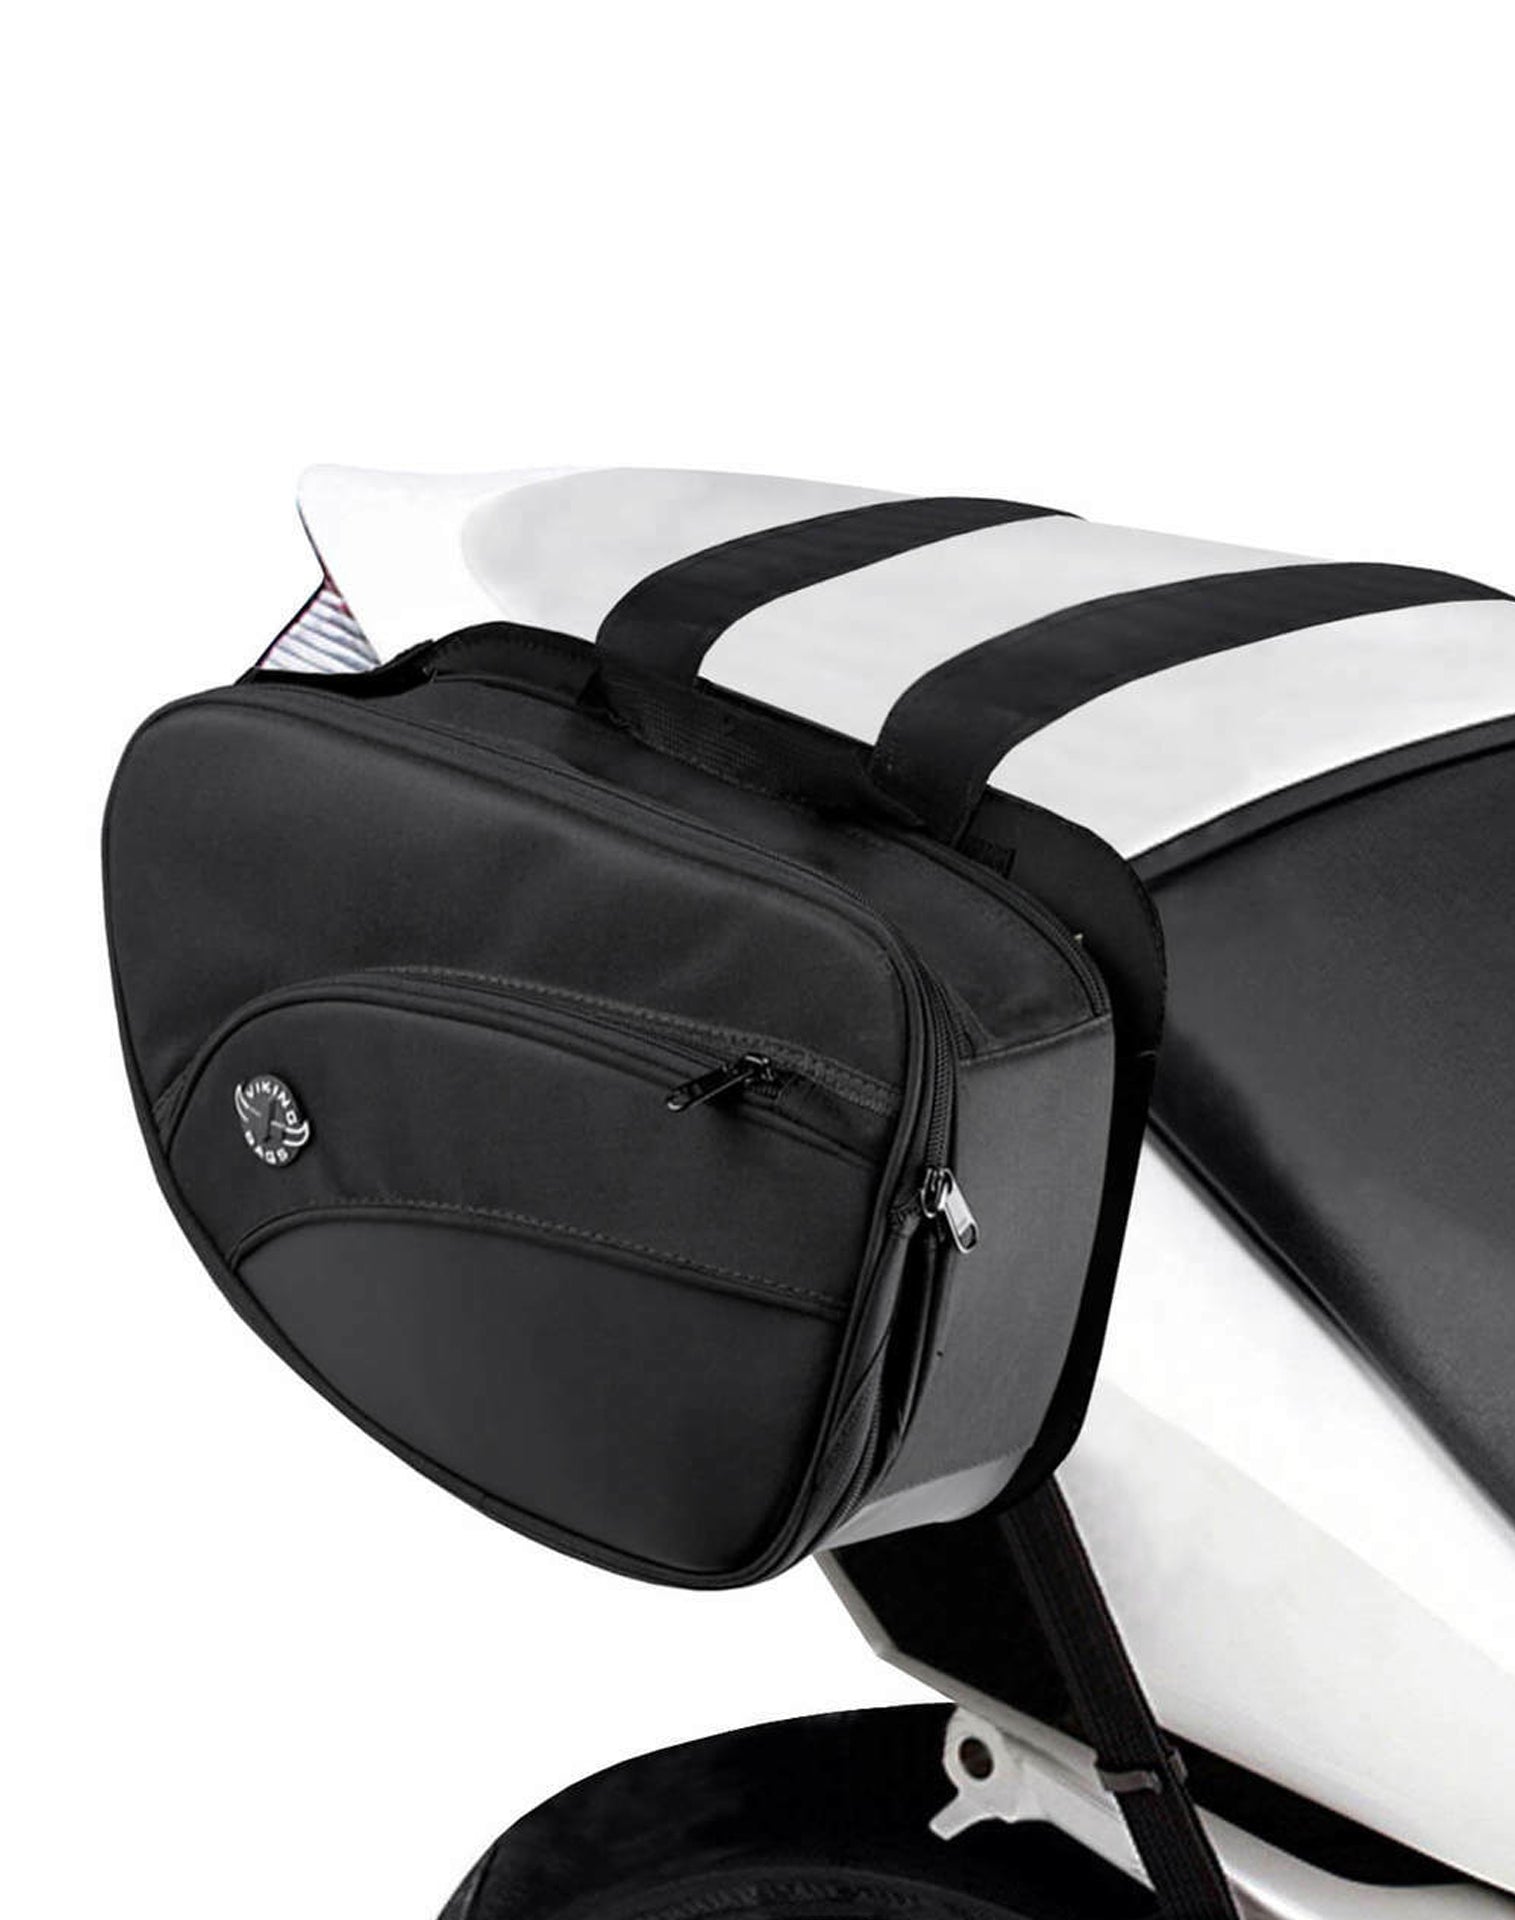 Viking Axe Mini Expandable Black Street Sportbike Saddlebags Weather Resistant Bags Comes in Pair